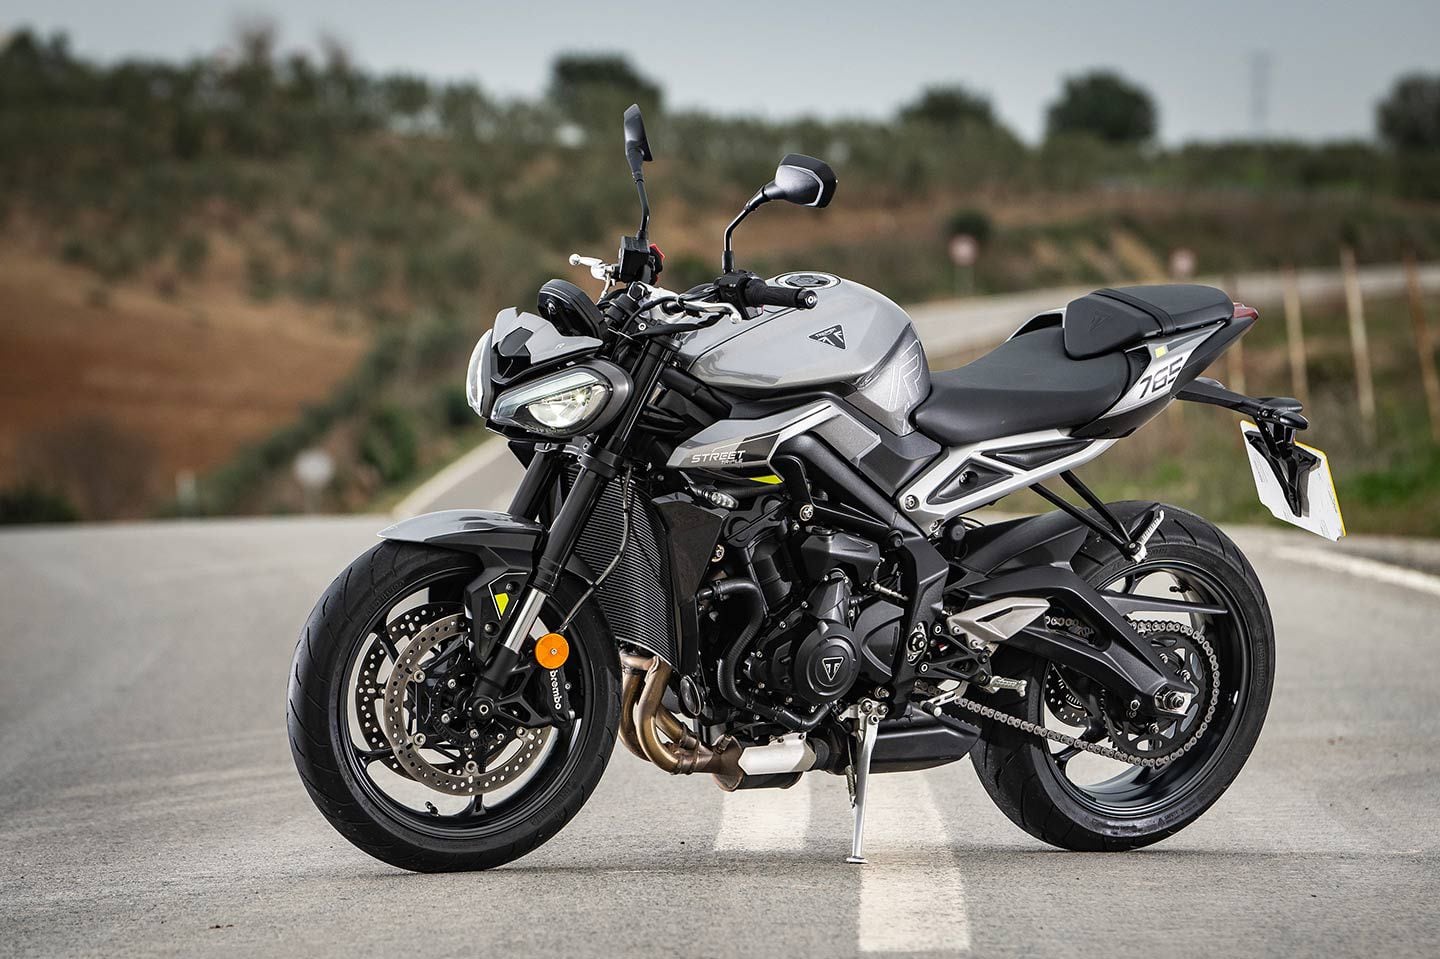 Modest updates for the Street Triple 765 R, which benefits from the same engine and styling tweaks as the RS, but makes only 2 more horsepower and 2 more pound-feet of torque than before. More advantageous are the new electronics, including cornering ABS, cornering traction control, and bidirectional quickshifter.